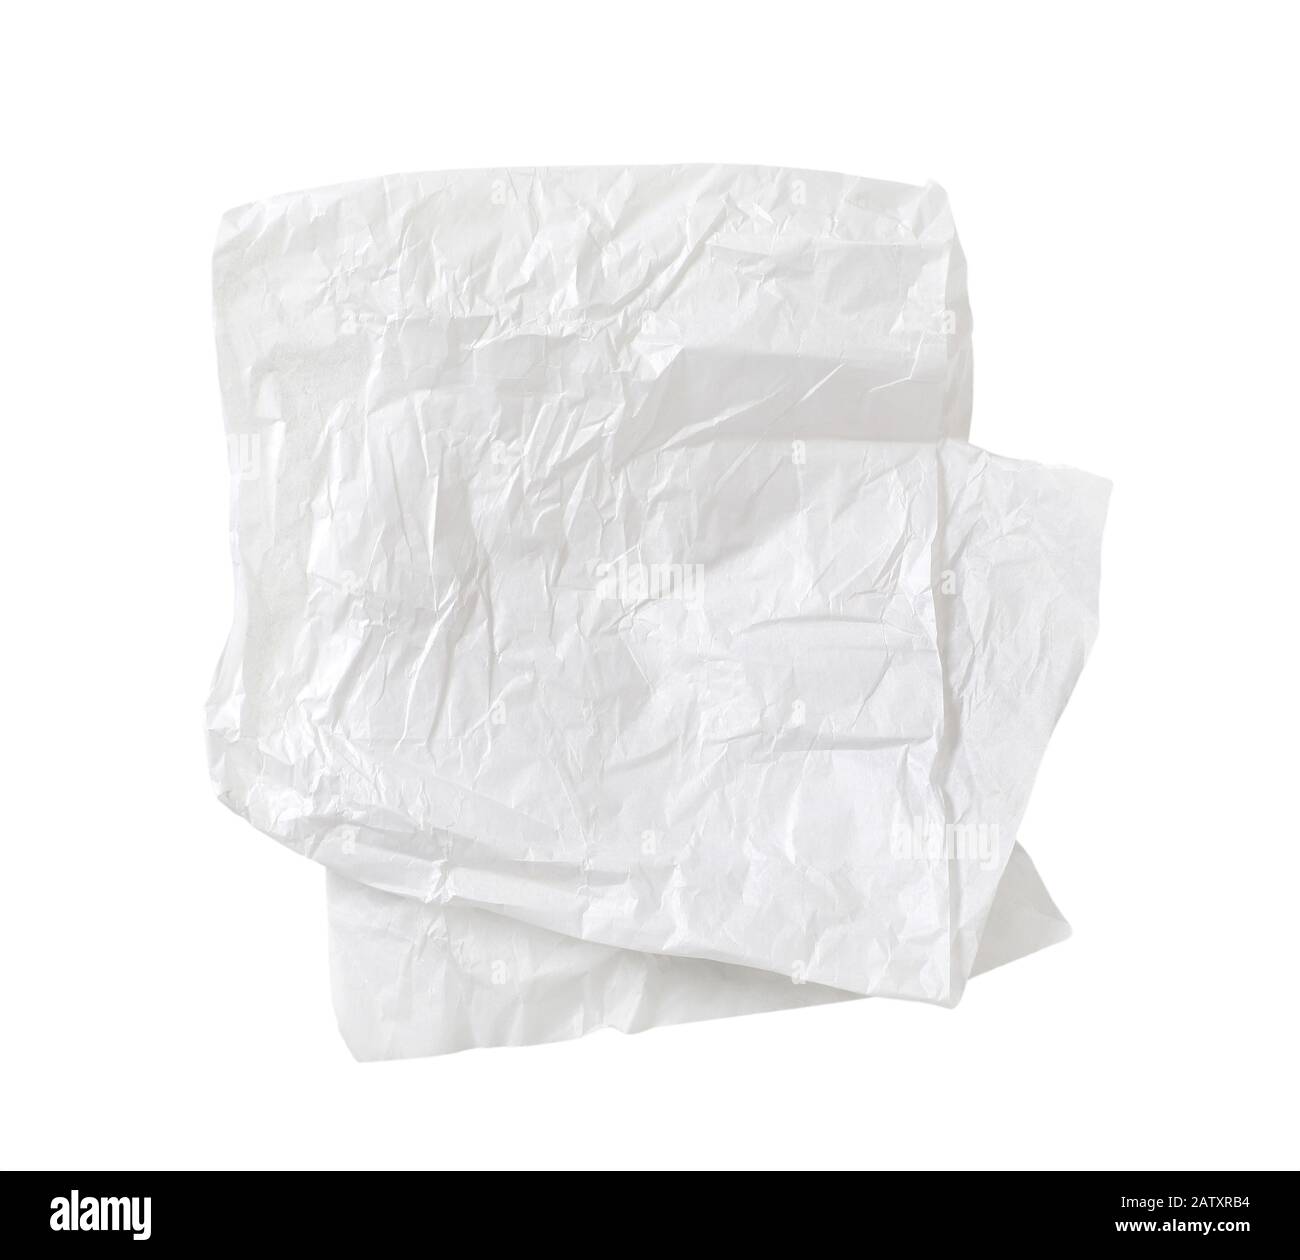 Creased sheet of white wax coated butcher paper isolated on white Stock Photo